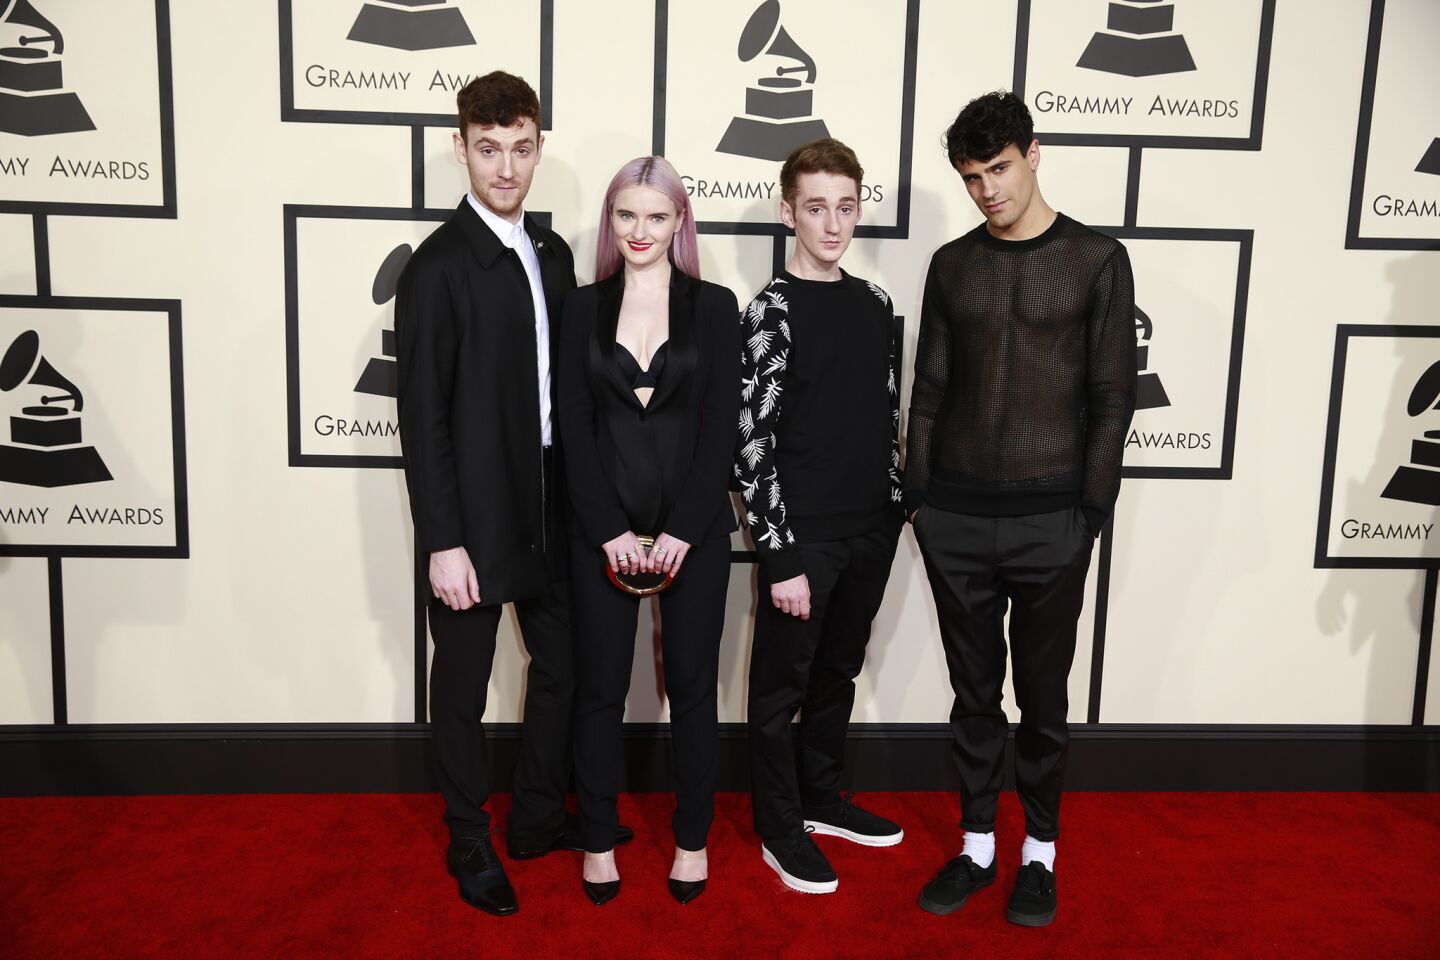 Clean Bandit is among arrivals at the Grammy Awards at Staples Center.